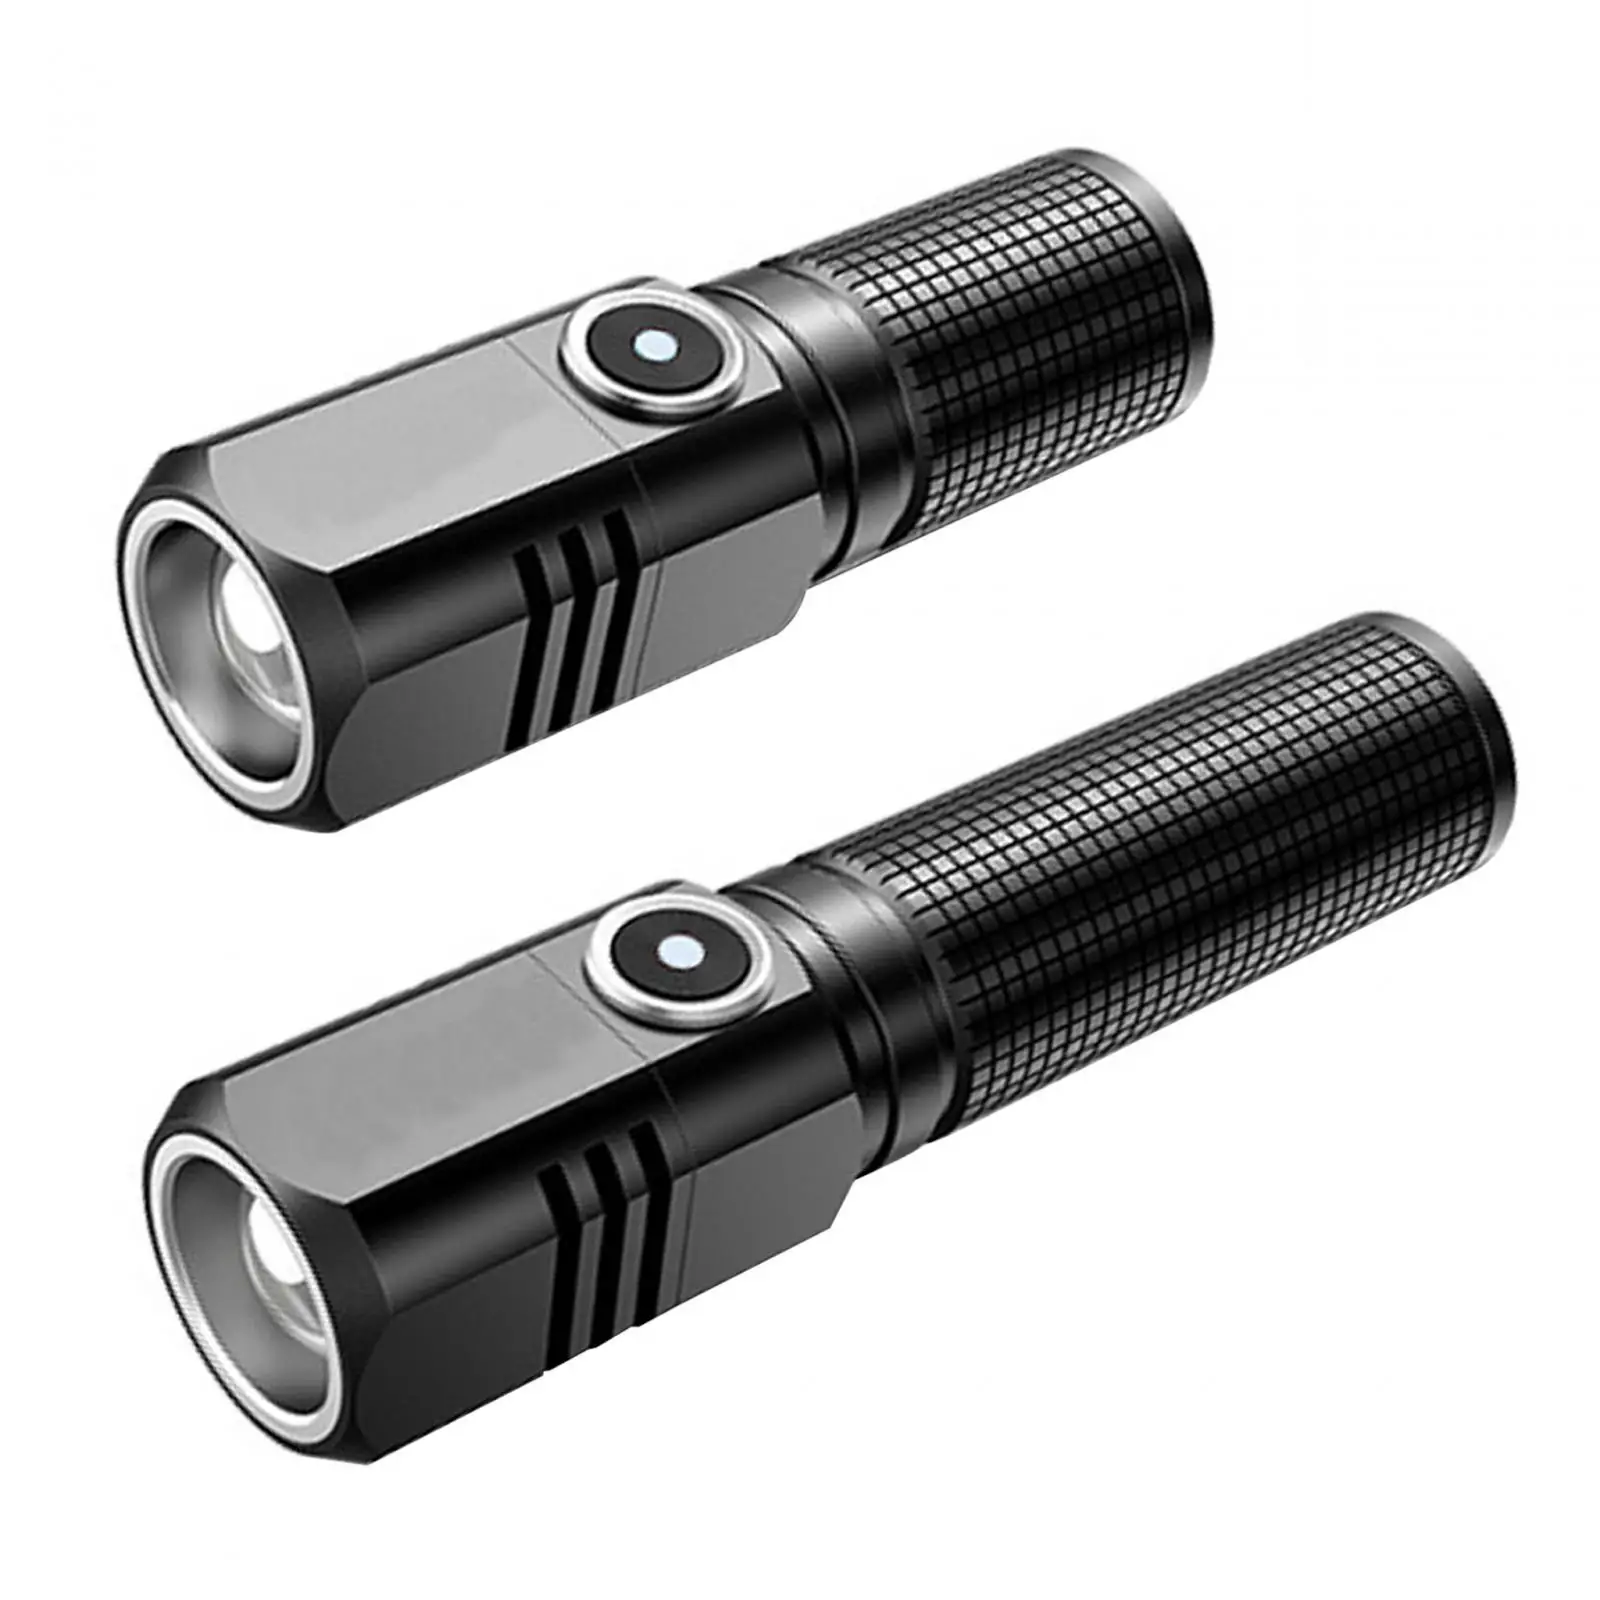 Mini Flashlight LED Flashlight 3 Modes Torch Compact Waterproof Handheld Torch Light for Climbing Travel Hiking Working Camping